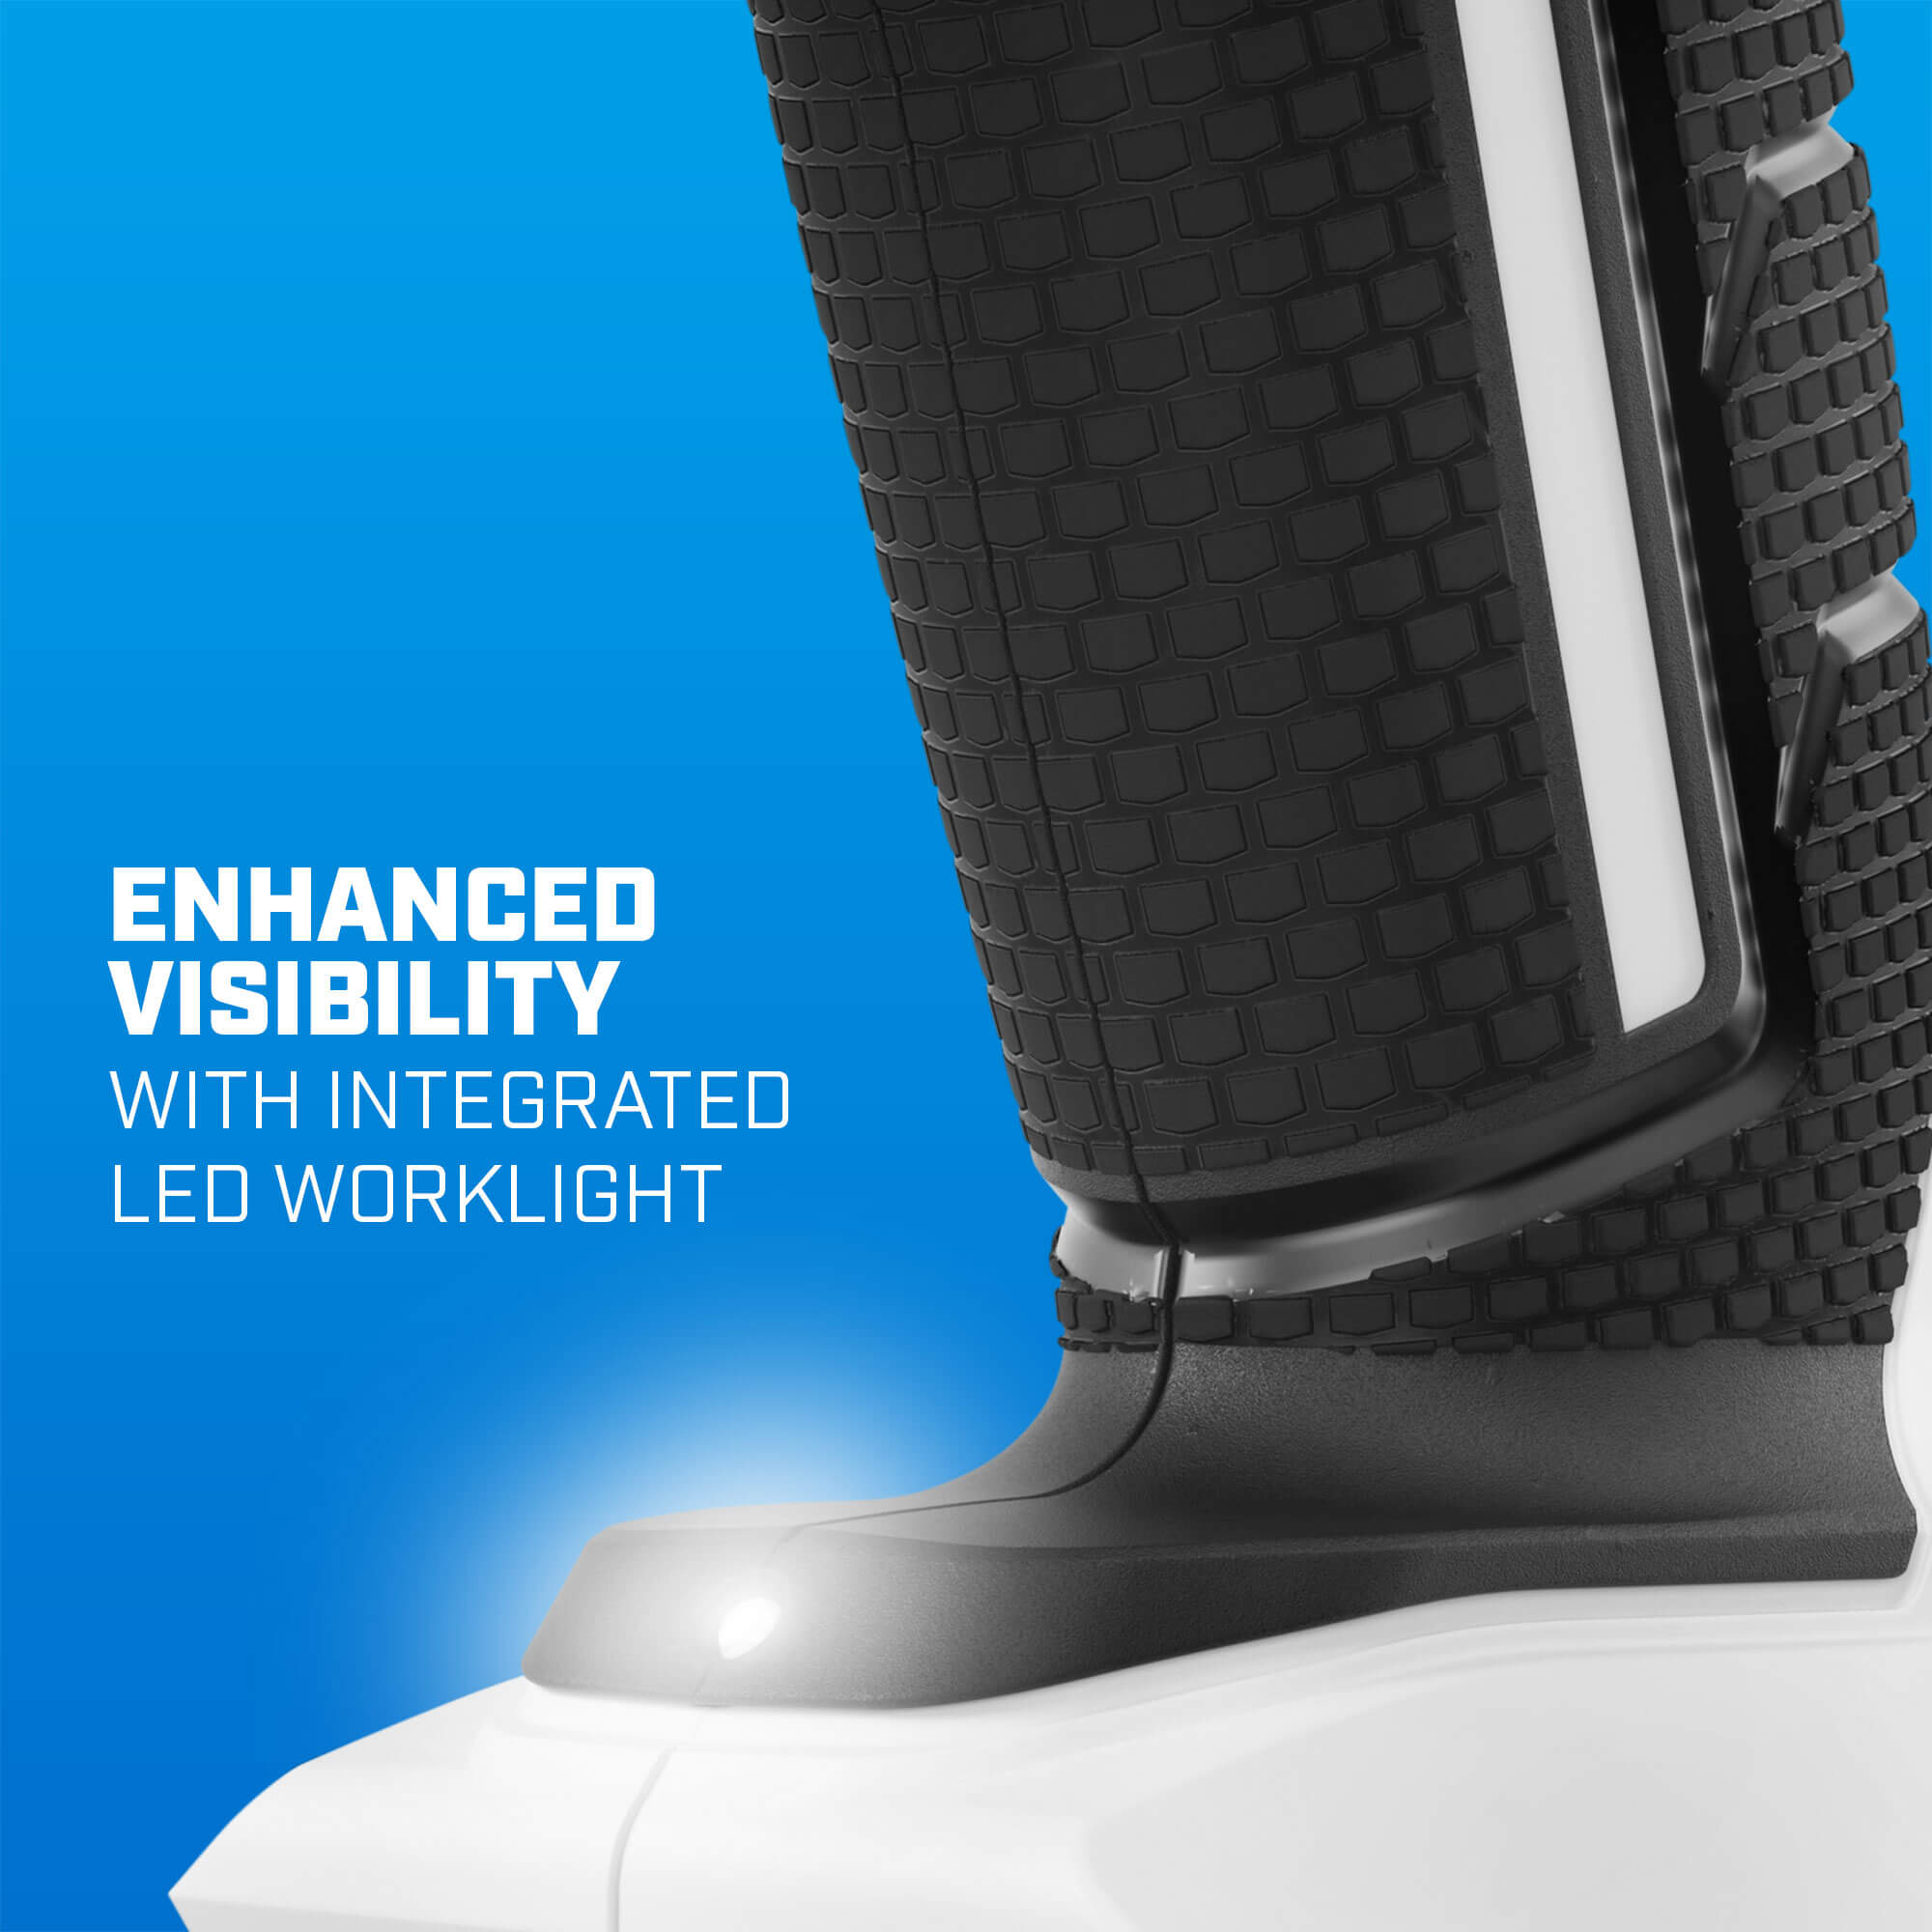 enhanced visibility with integrated LED worklight